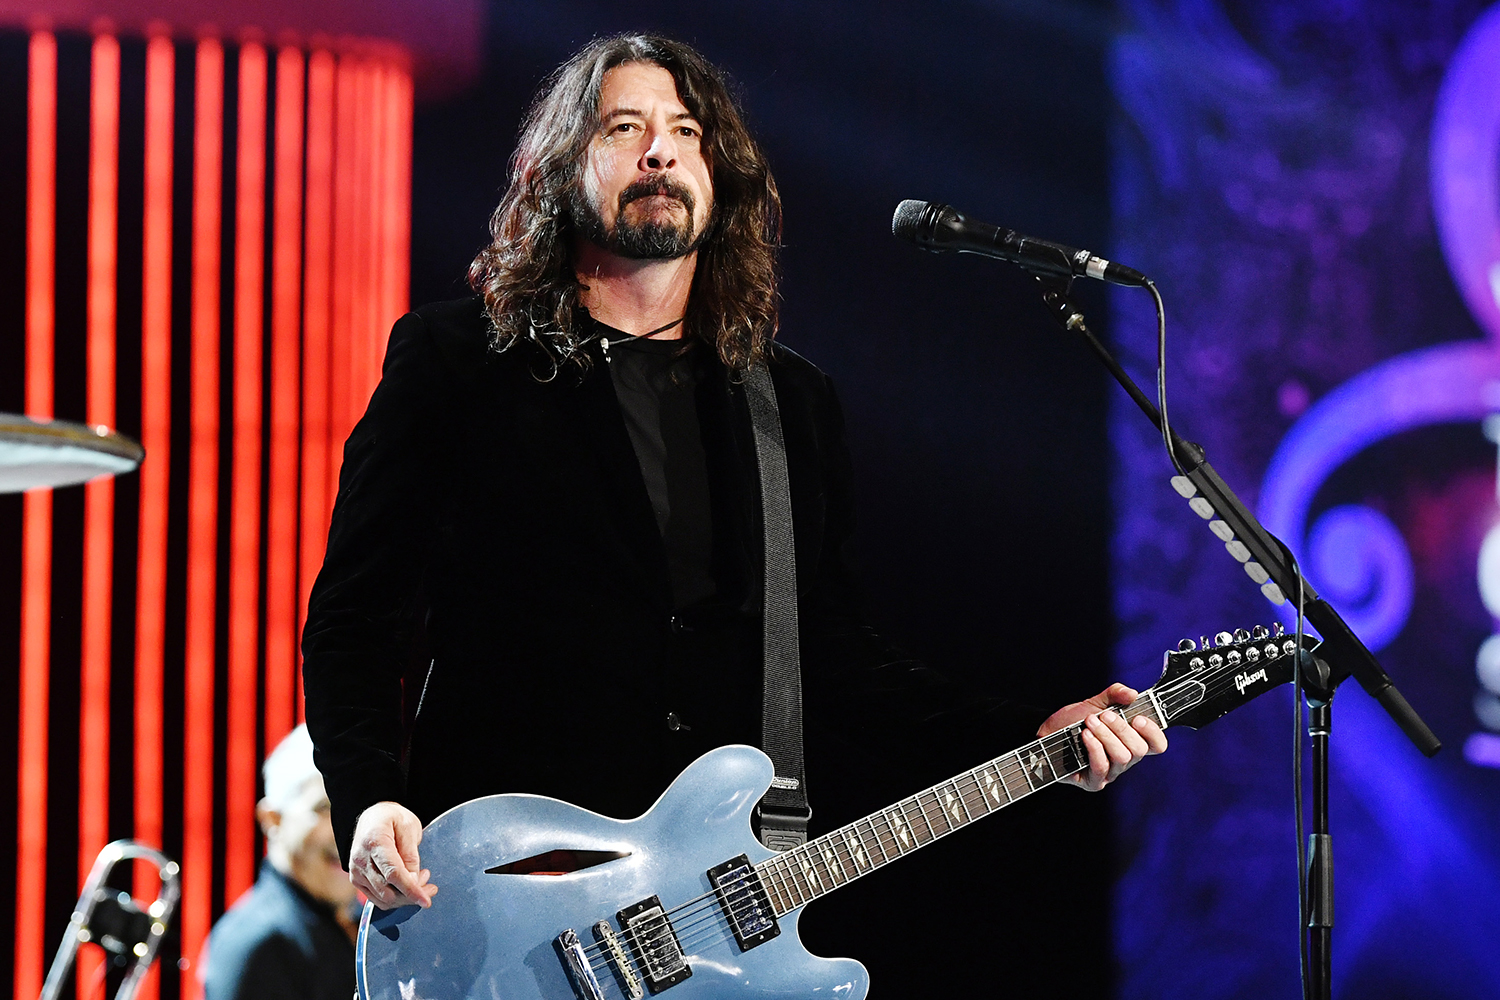 Dave Grohl of Foo Fighters performing during the Prince tribute at the Grammy Awards in 2020